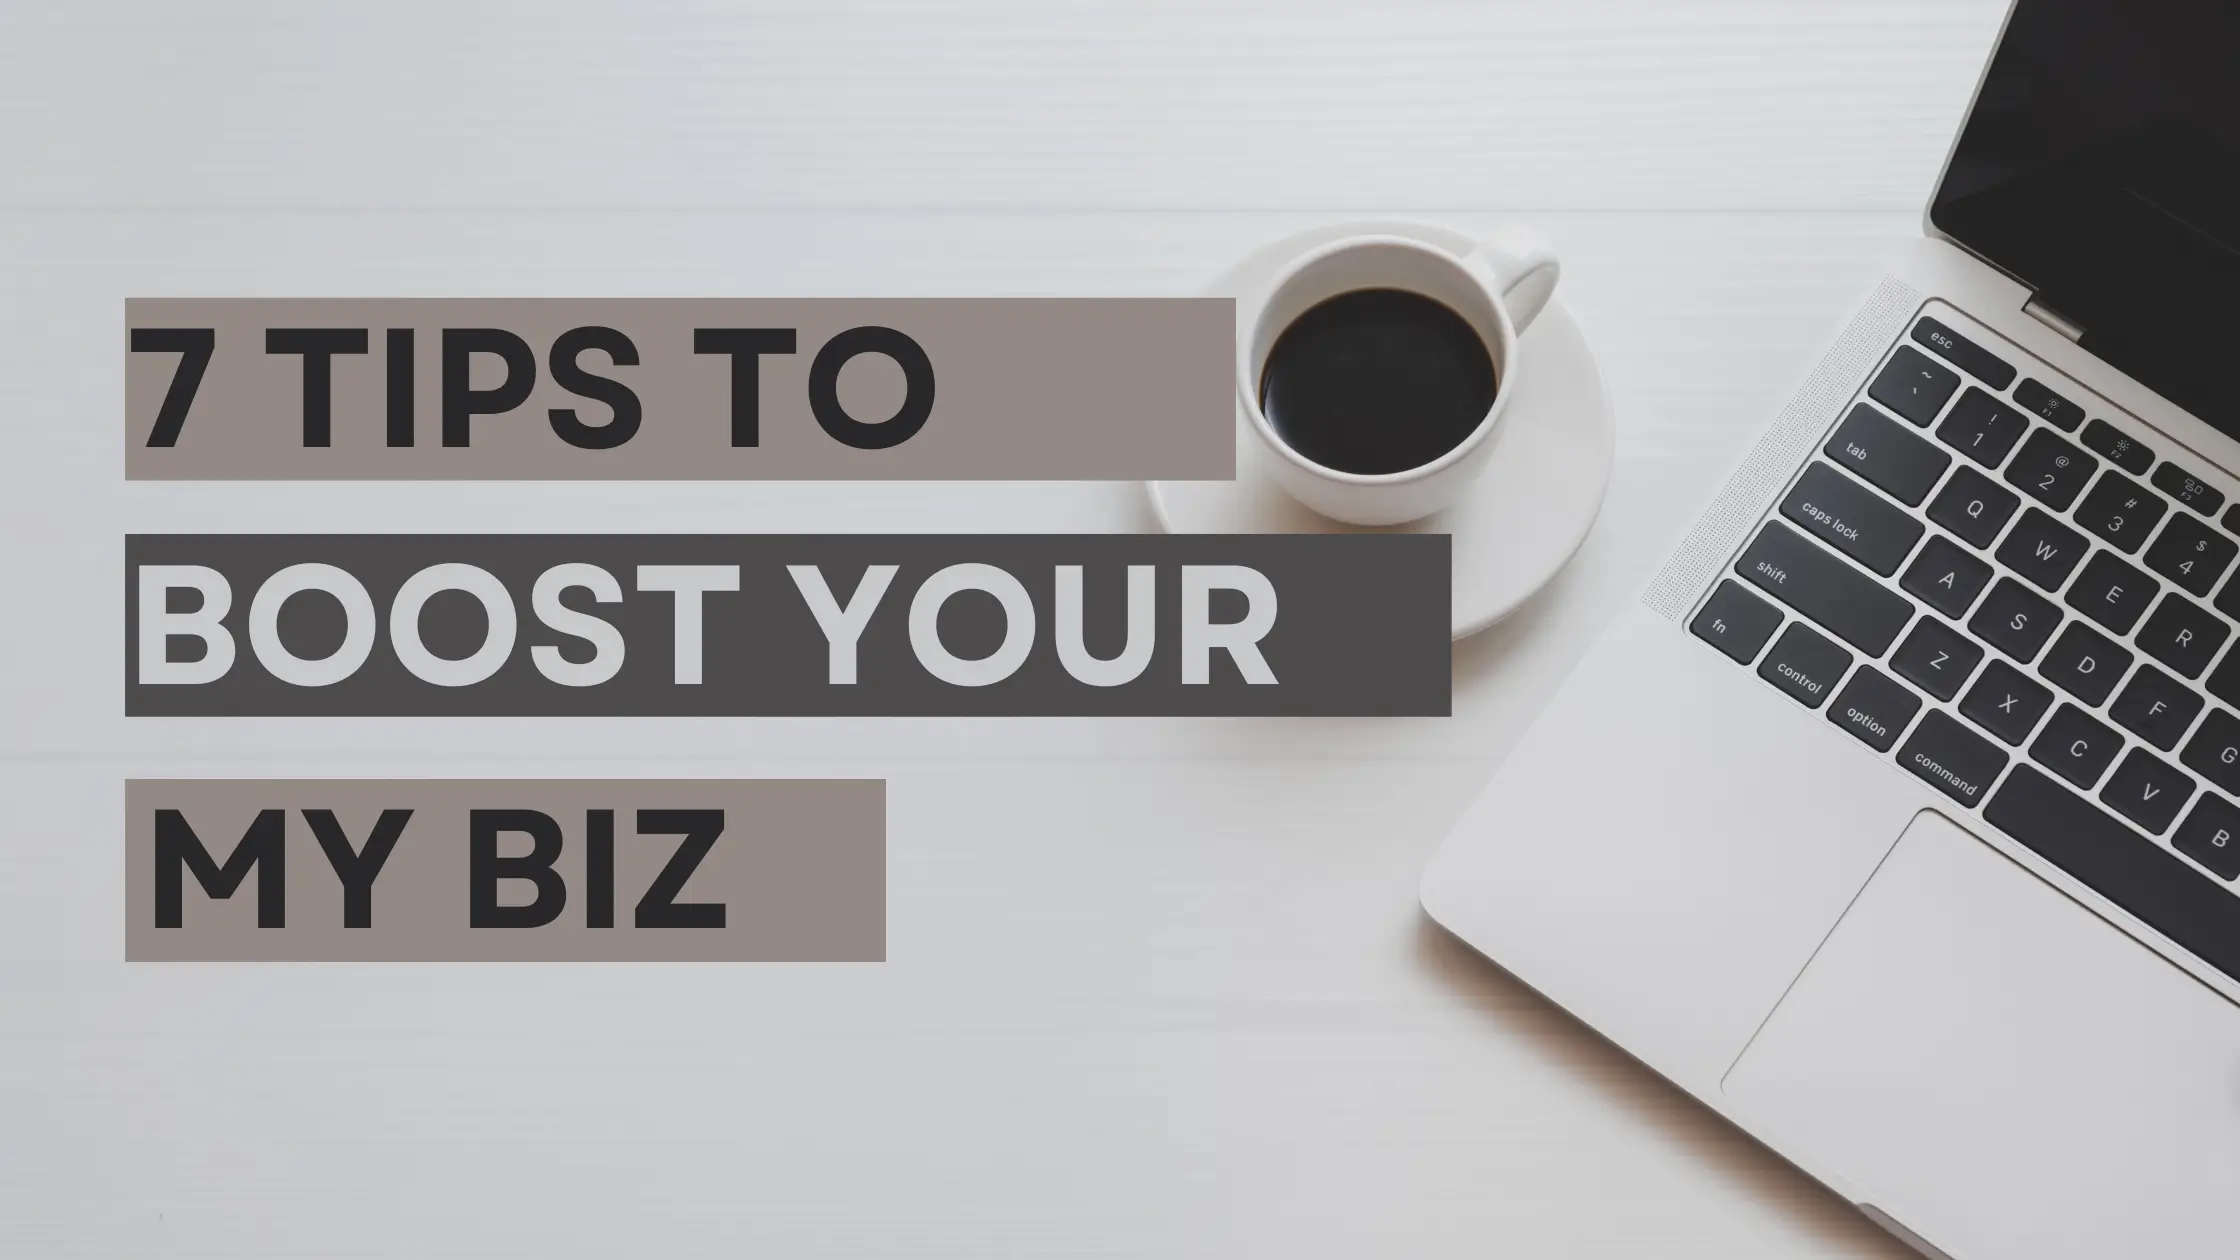 coffee and laptop and text saying 7 tips to boost your my biz